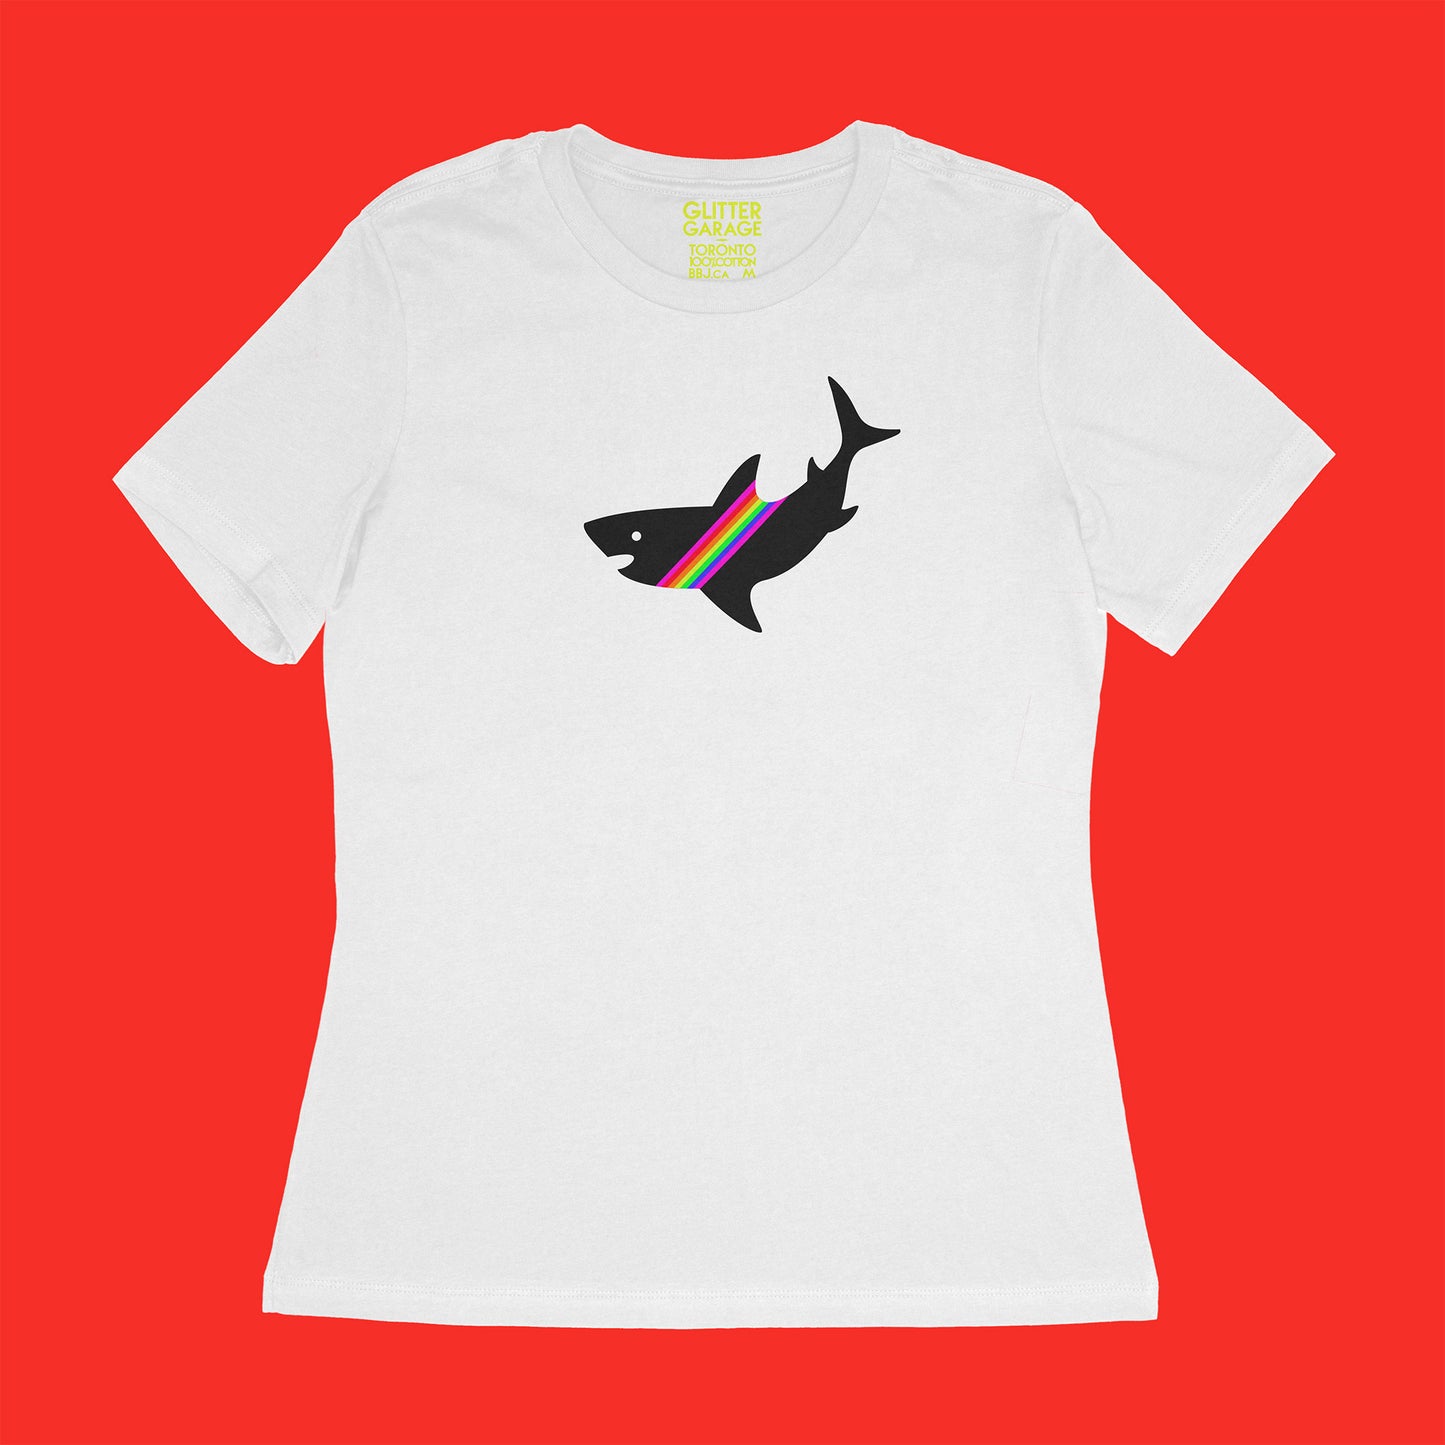 fuzzy grey shark with neon rainbow stripe on white women's relaxed fit tee by BBJ / Glitter Garage